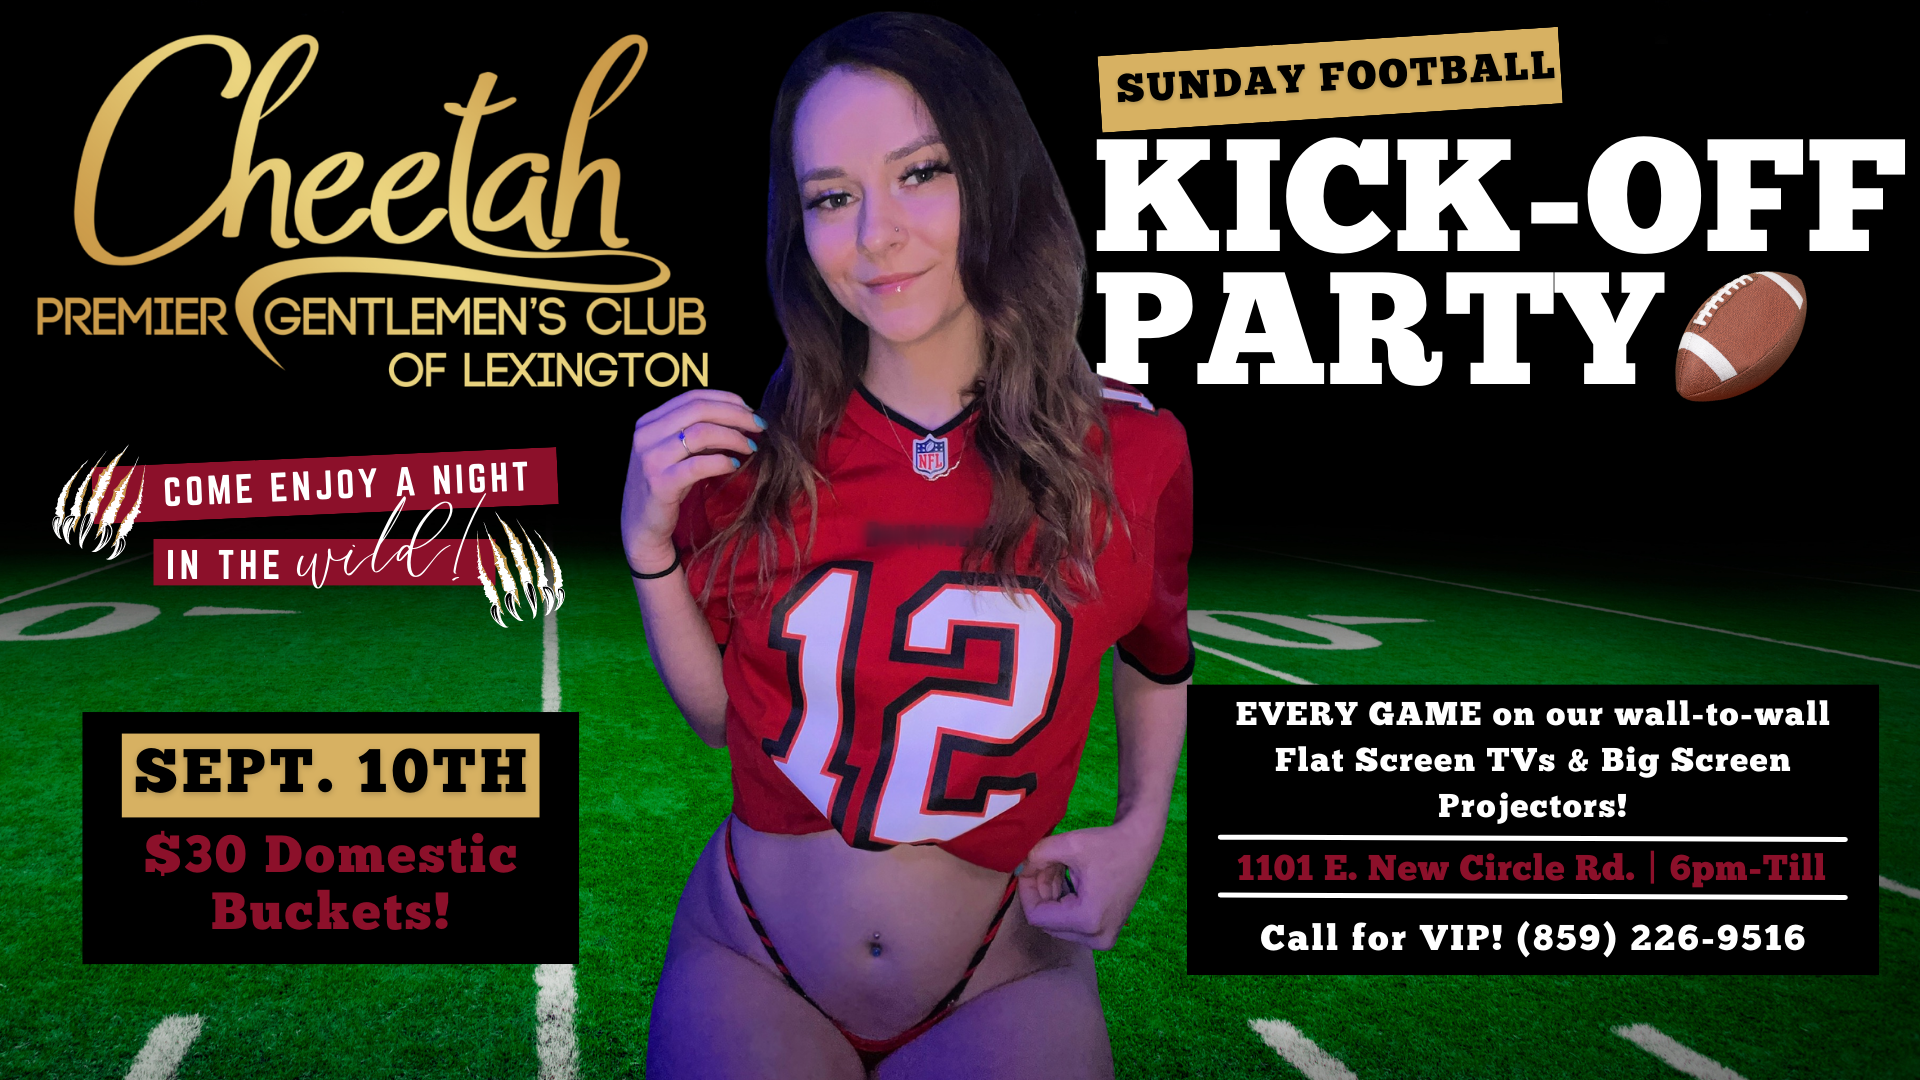 NFL Kickoff party